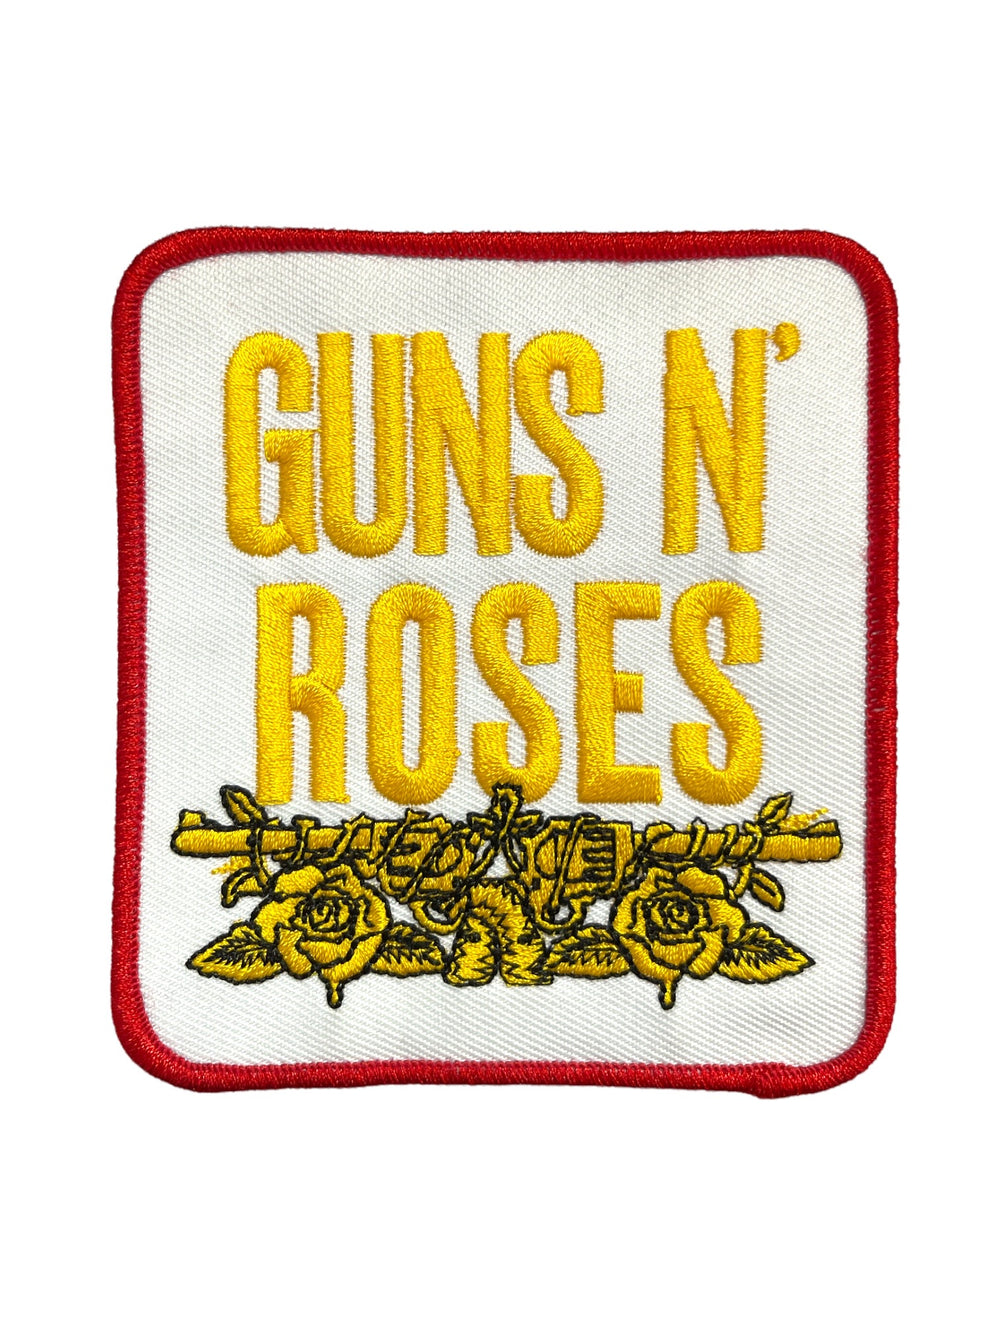 Guns n Roses Stacked White  Official Woven Patch Brand New